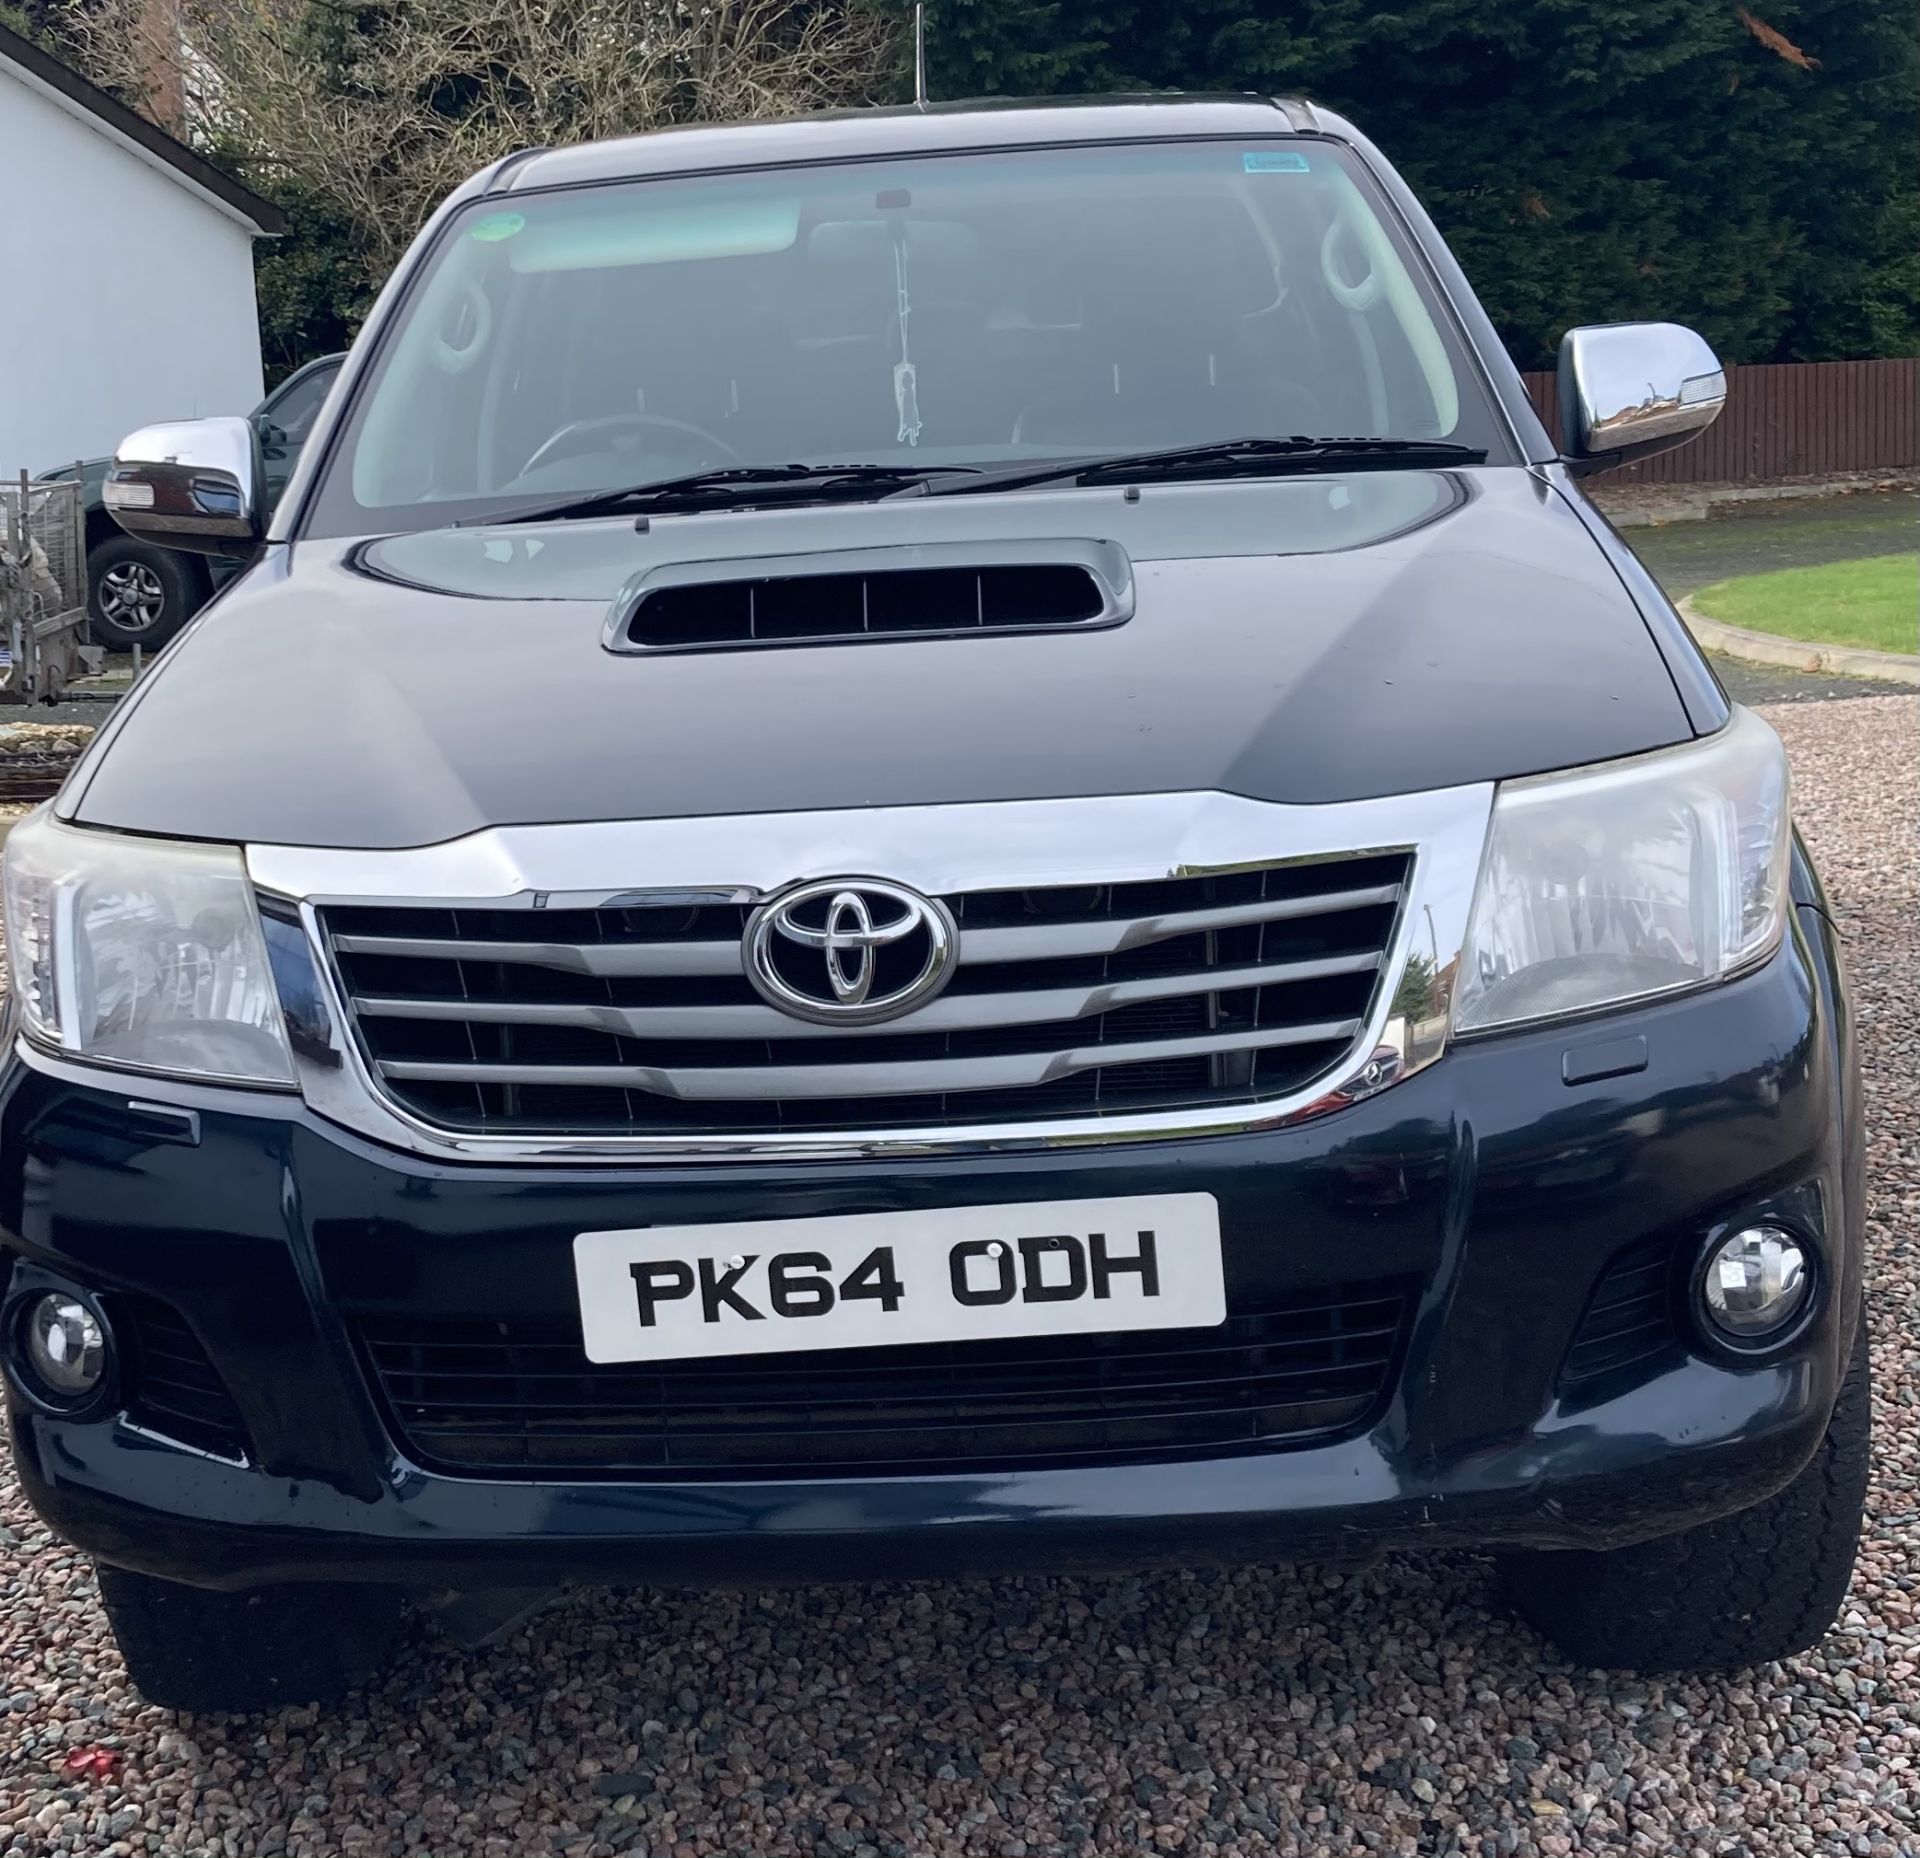 TOYOTA HILUX 2014 .60000 MILES.LOCATION NORTHERN IRELAND. - Image 2 of 5